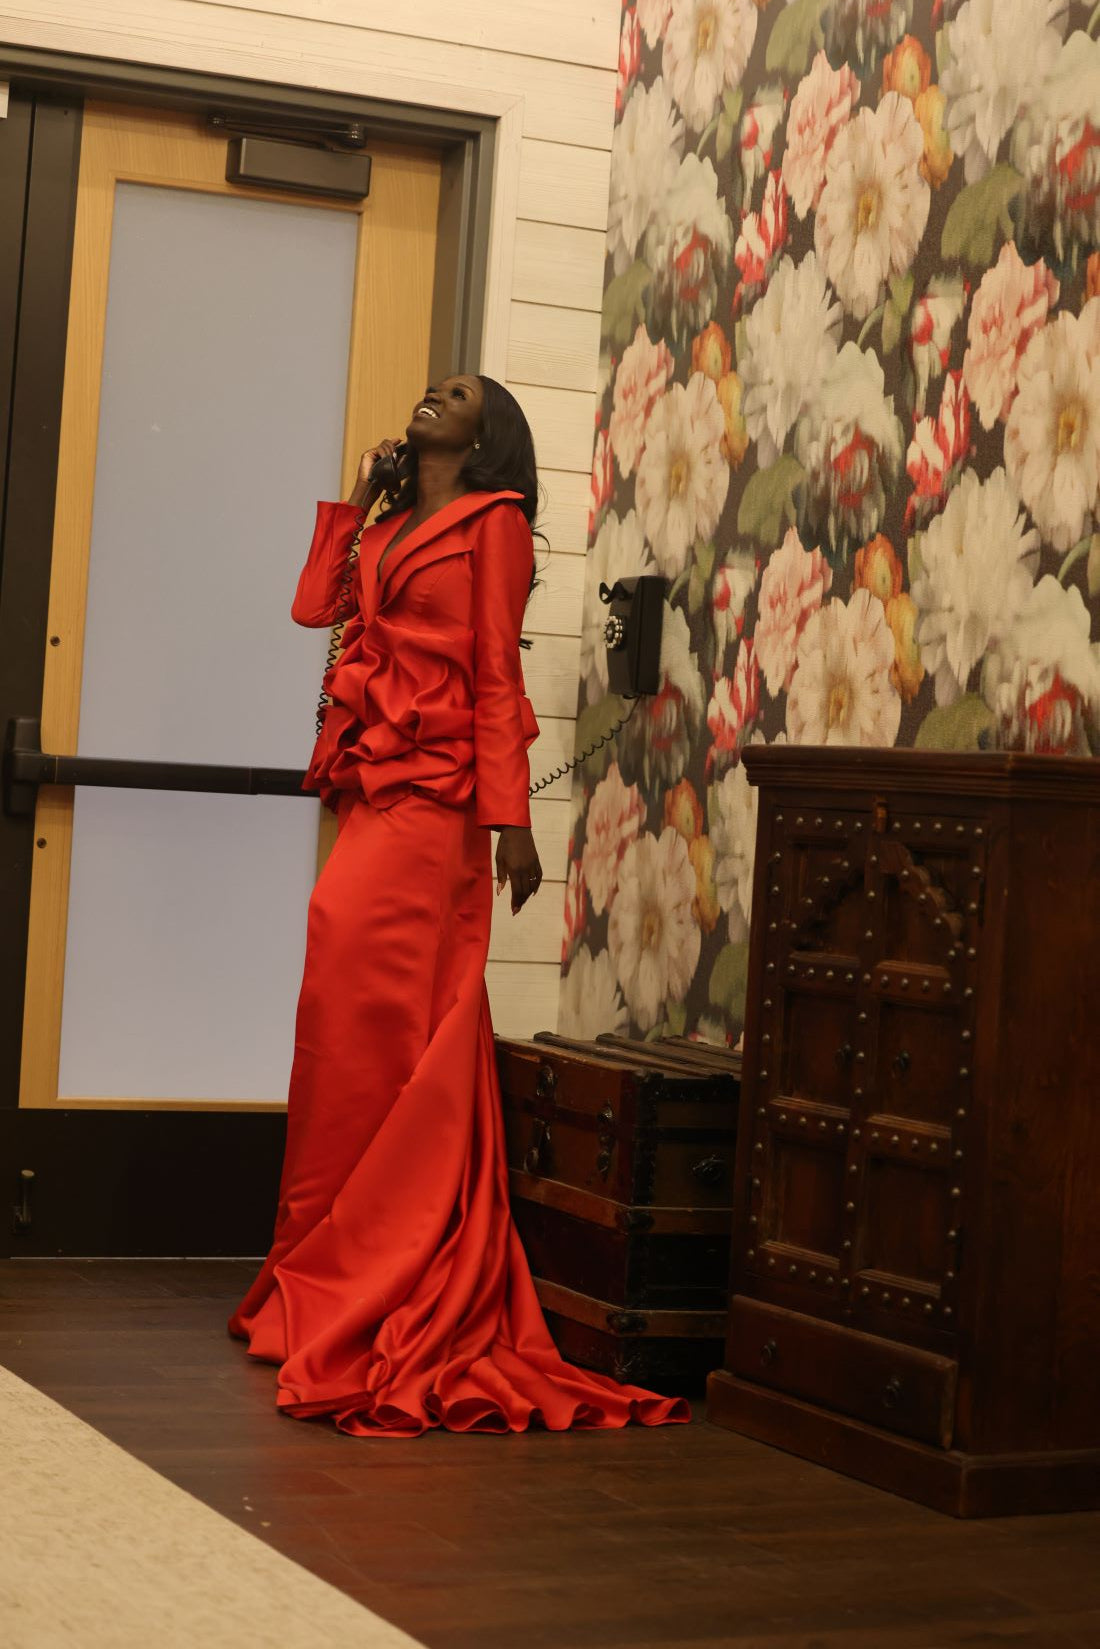 HOK House Of KLynn Couture Rich Satin Dramatic Red Luxury Ruffled Tuxedo Gown Flowing Train Evening Event Gala Vogue Runway Top Looks Lifestyle Holiday Party New Years Eve Birthday Red Carpet Style Inspiration Designer Box Office Award Show Winner Nominees 